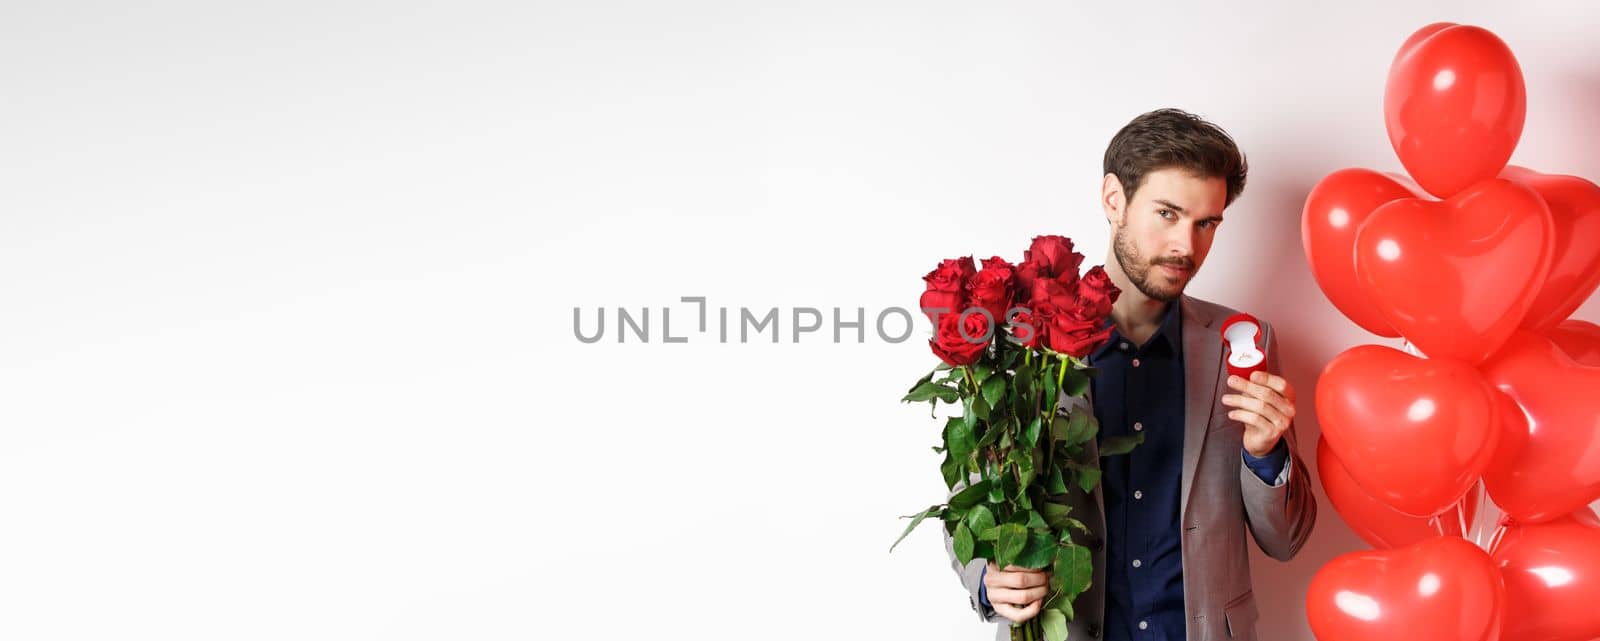 Handsome boyfriend in suit making proposal on lovers day, holding engagement ring and red roses, prepare surprise flowers and heart balloons for girlfriend on Valentines, white background.